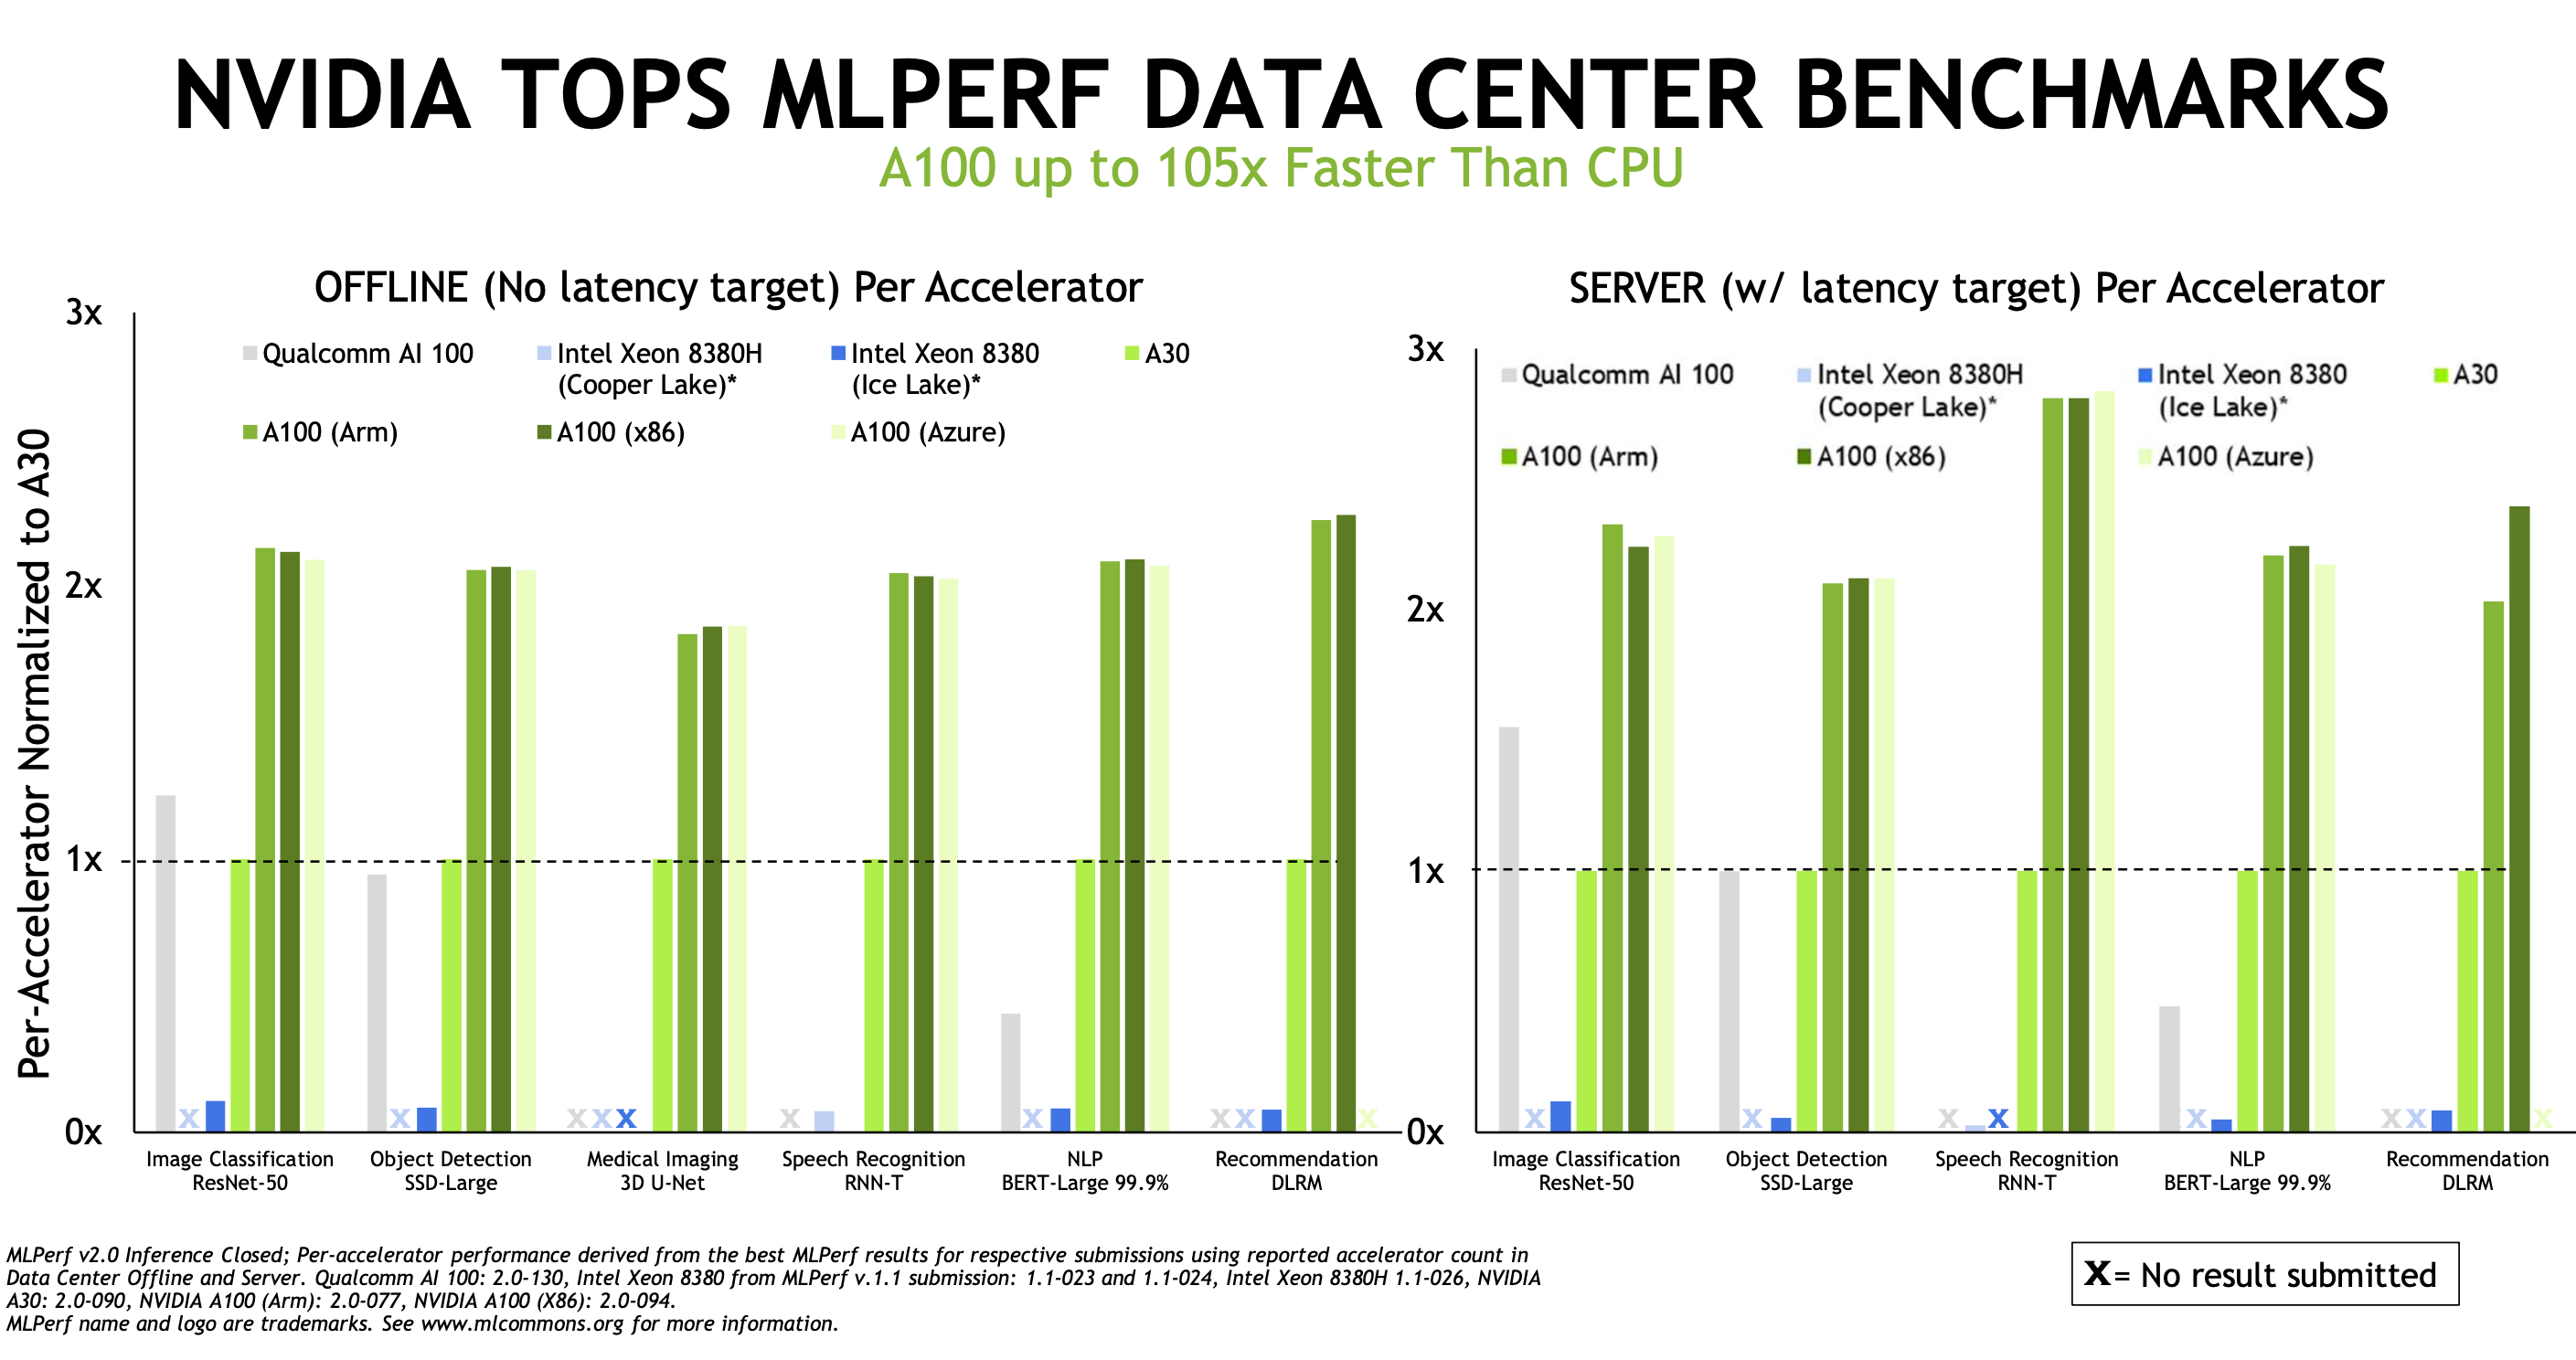 Graphcore brings new competition to Nvidia in latest MLPerf AI benchmarks